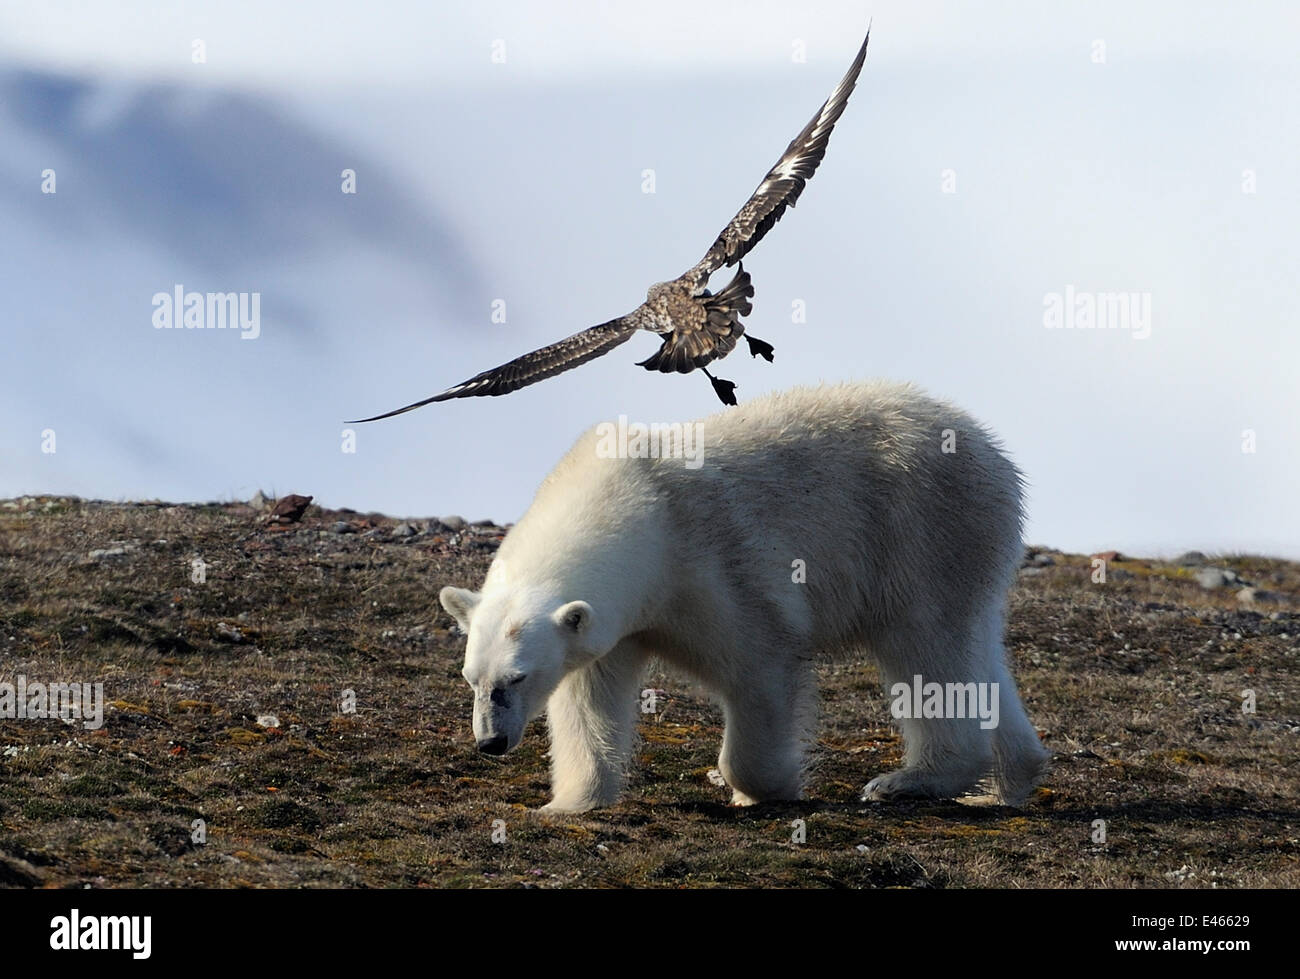 Polar Bear (Ursus maritimus)  mobbed by possibly a Skua, Svalbard, Norway, July Stock Photo